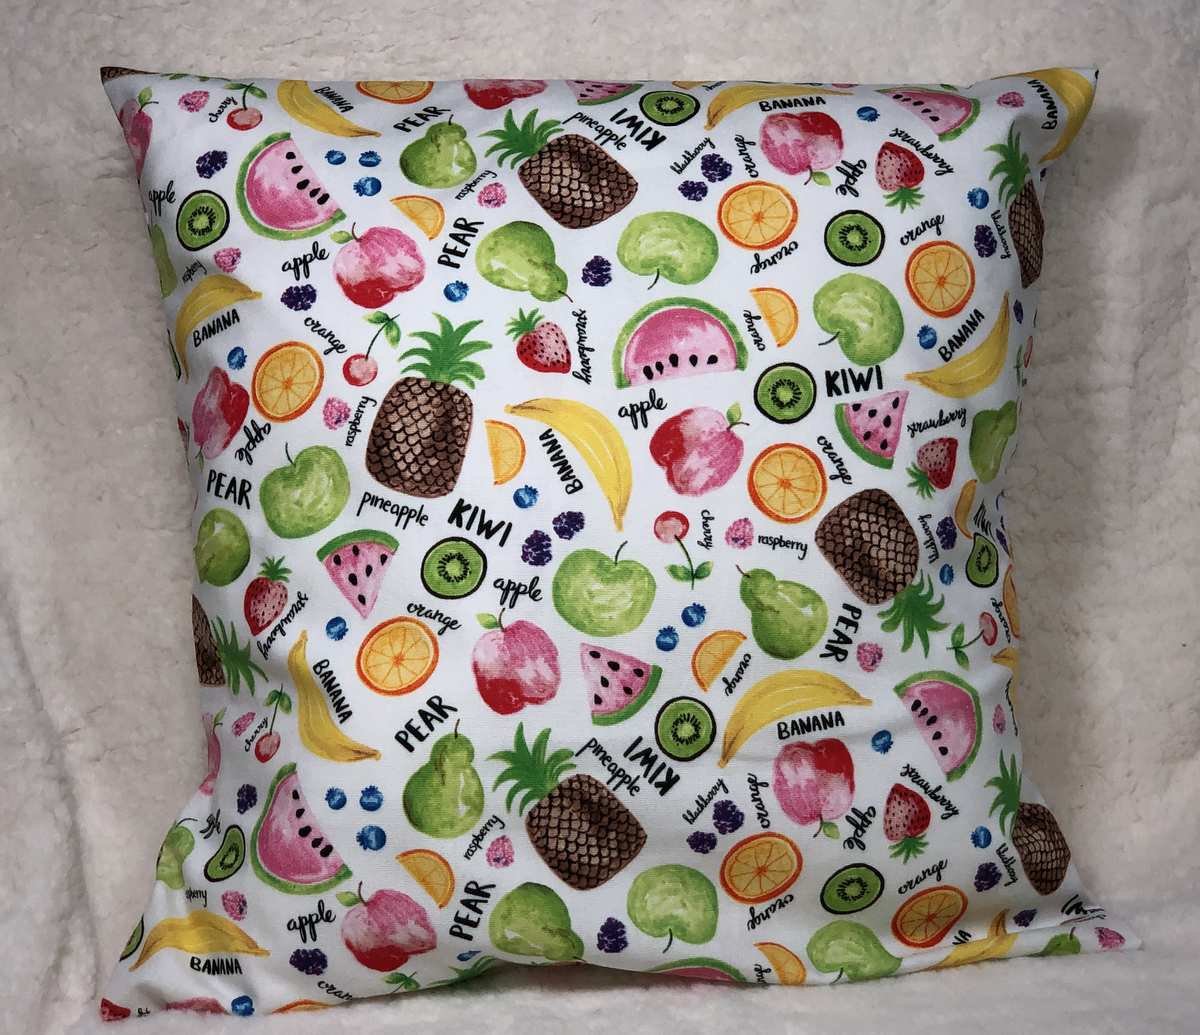 Rainbow Fruit Island Beach Fruit Food Pillow Cover, Sofa Accent Pillow Sham, Farmhouse Pillow Cover, Handcrafted Removable Pillow Cover